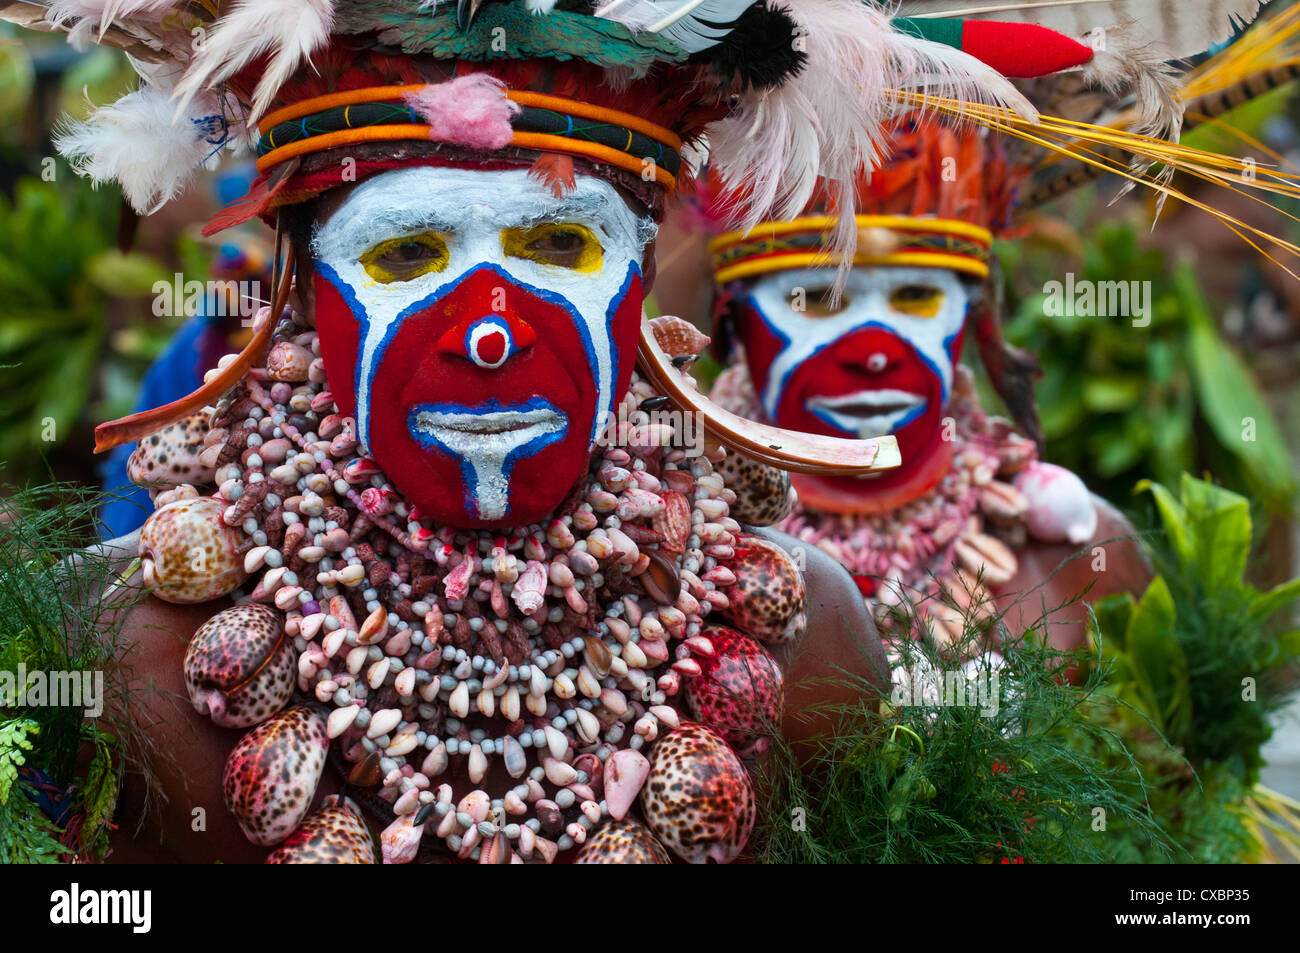 Colourfully dressed and face painted local tribes celebrating the traditional Sing Sing, Enga, Highlands of Papua New Guinea Stock Photo